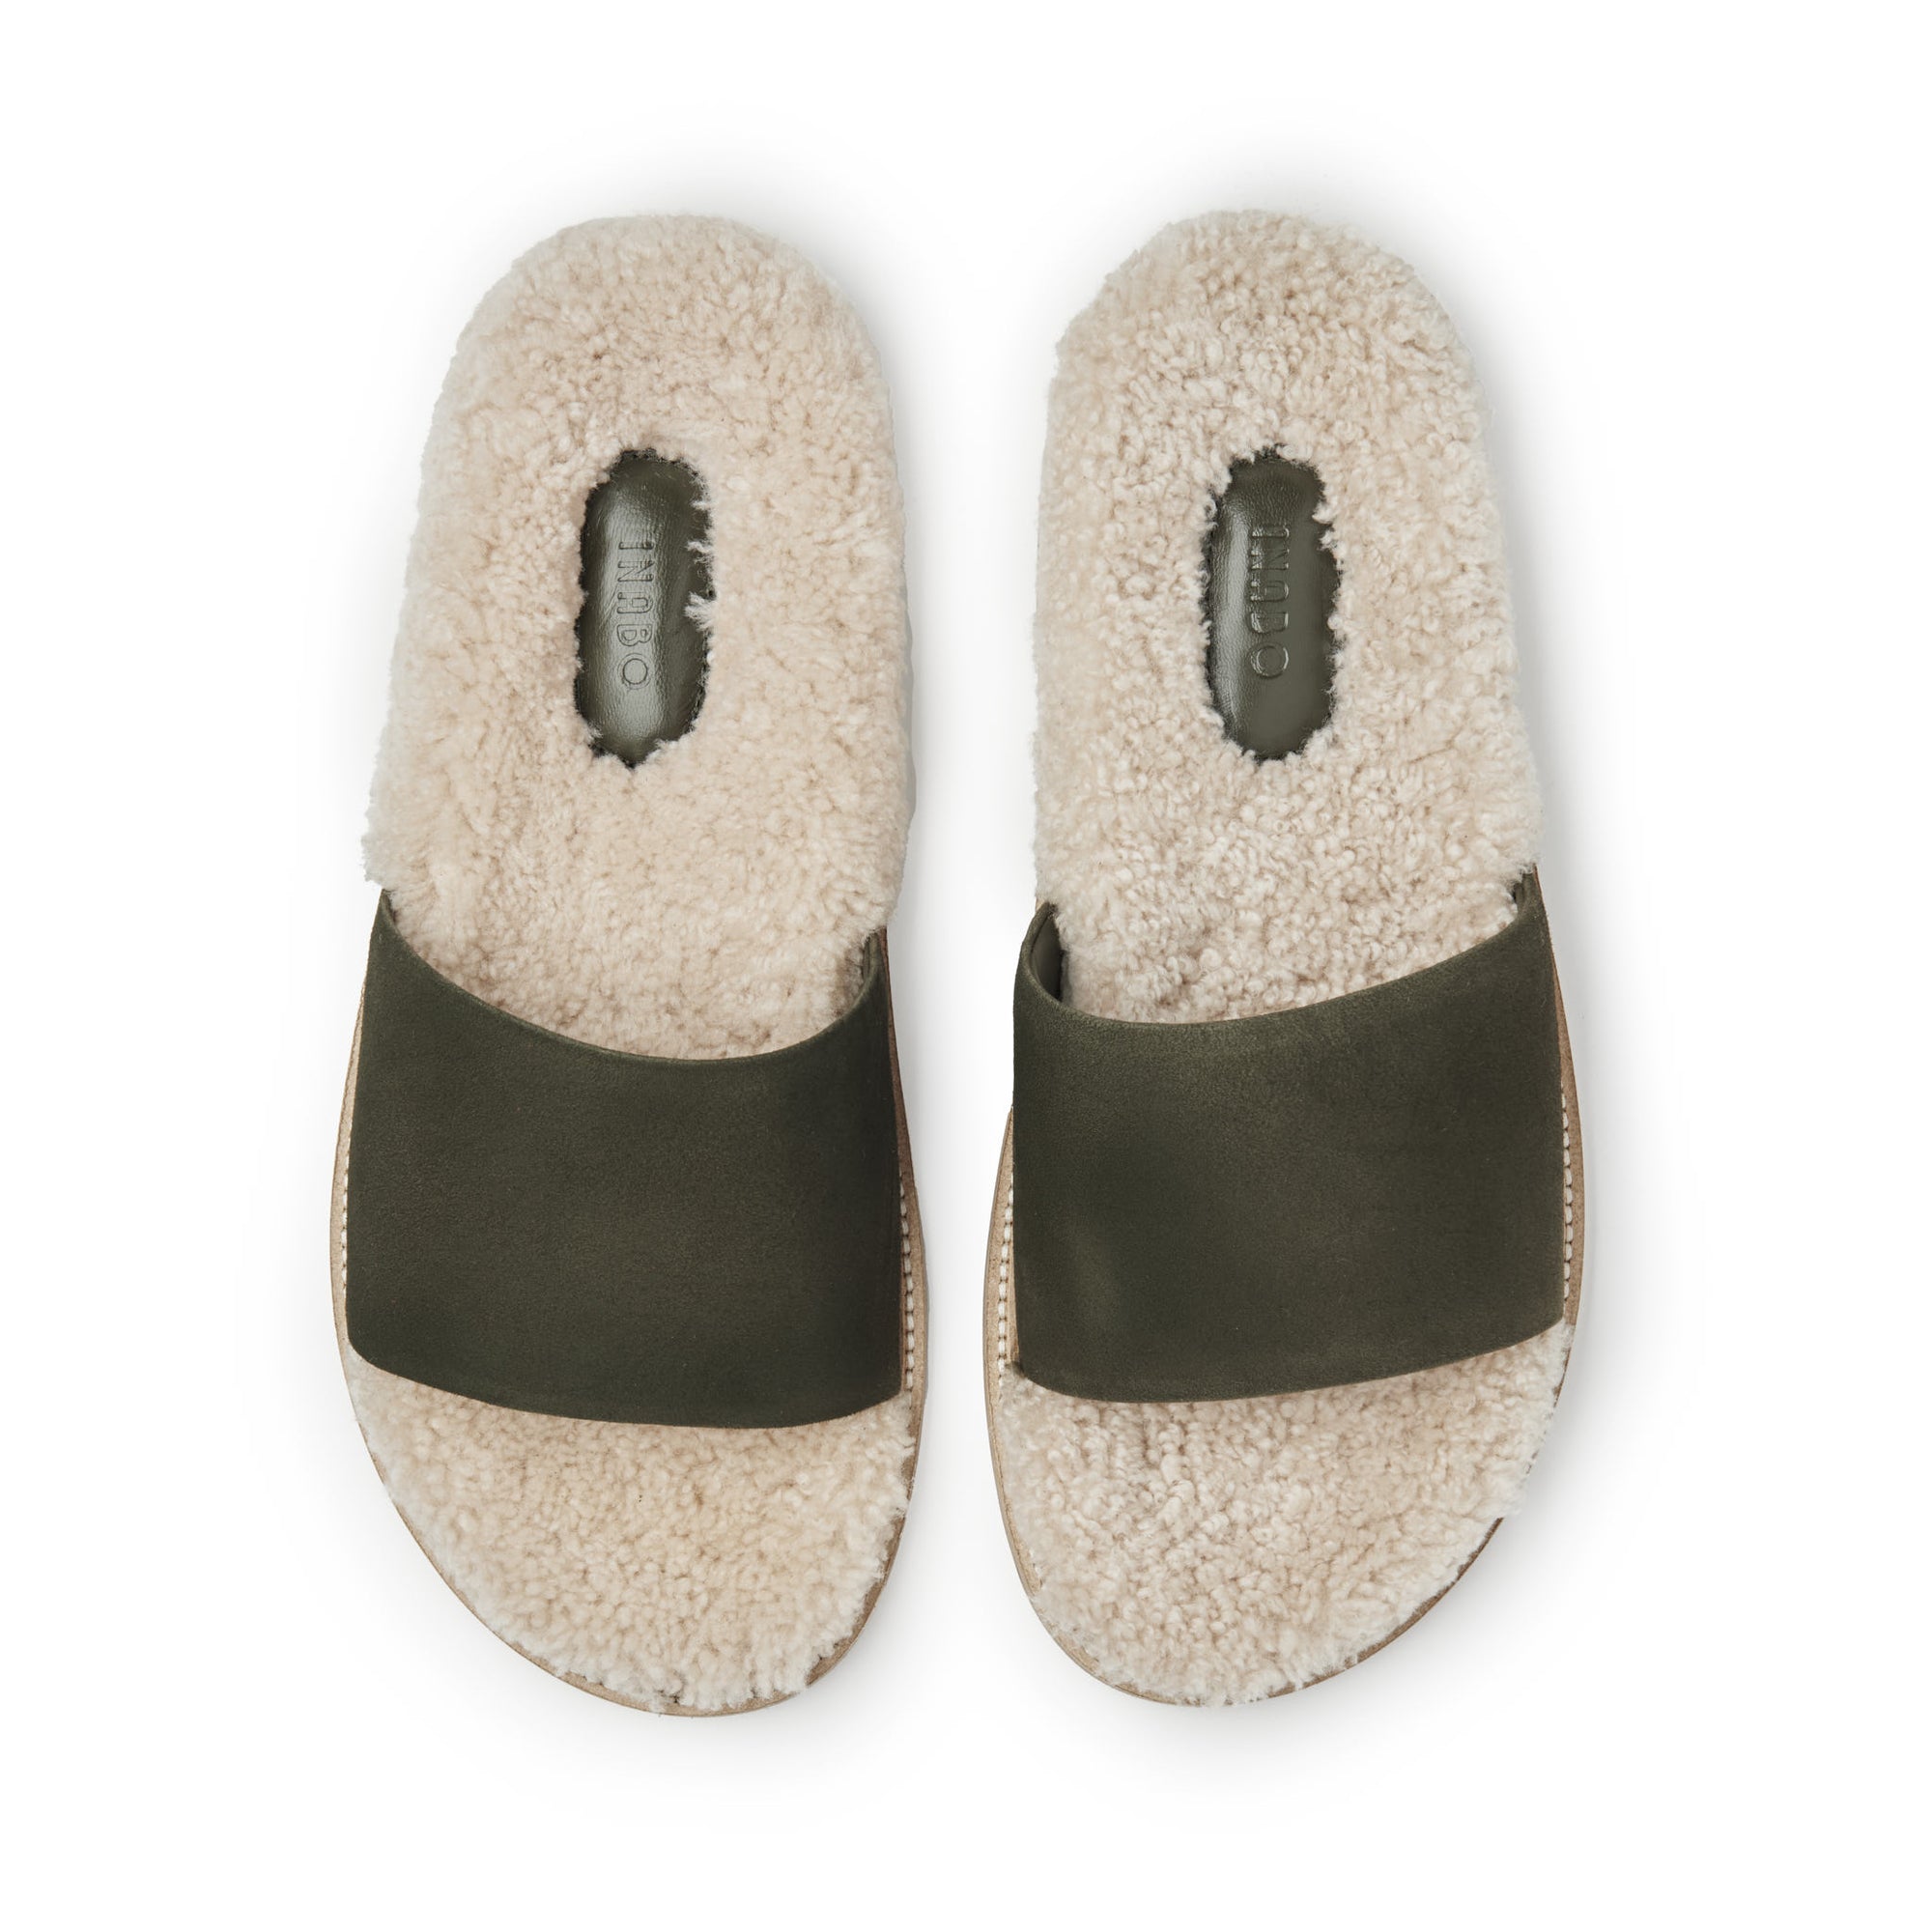 Inabo Men's Patio slipper in army green suede and white shearling from above